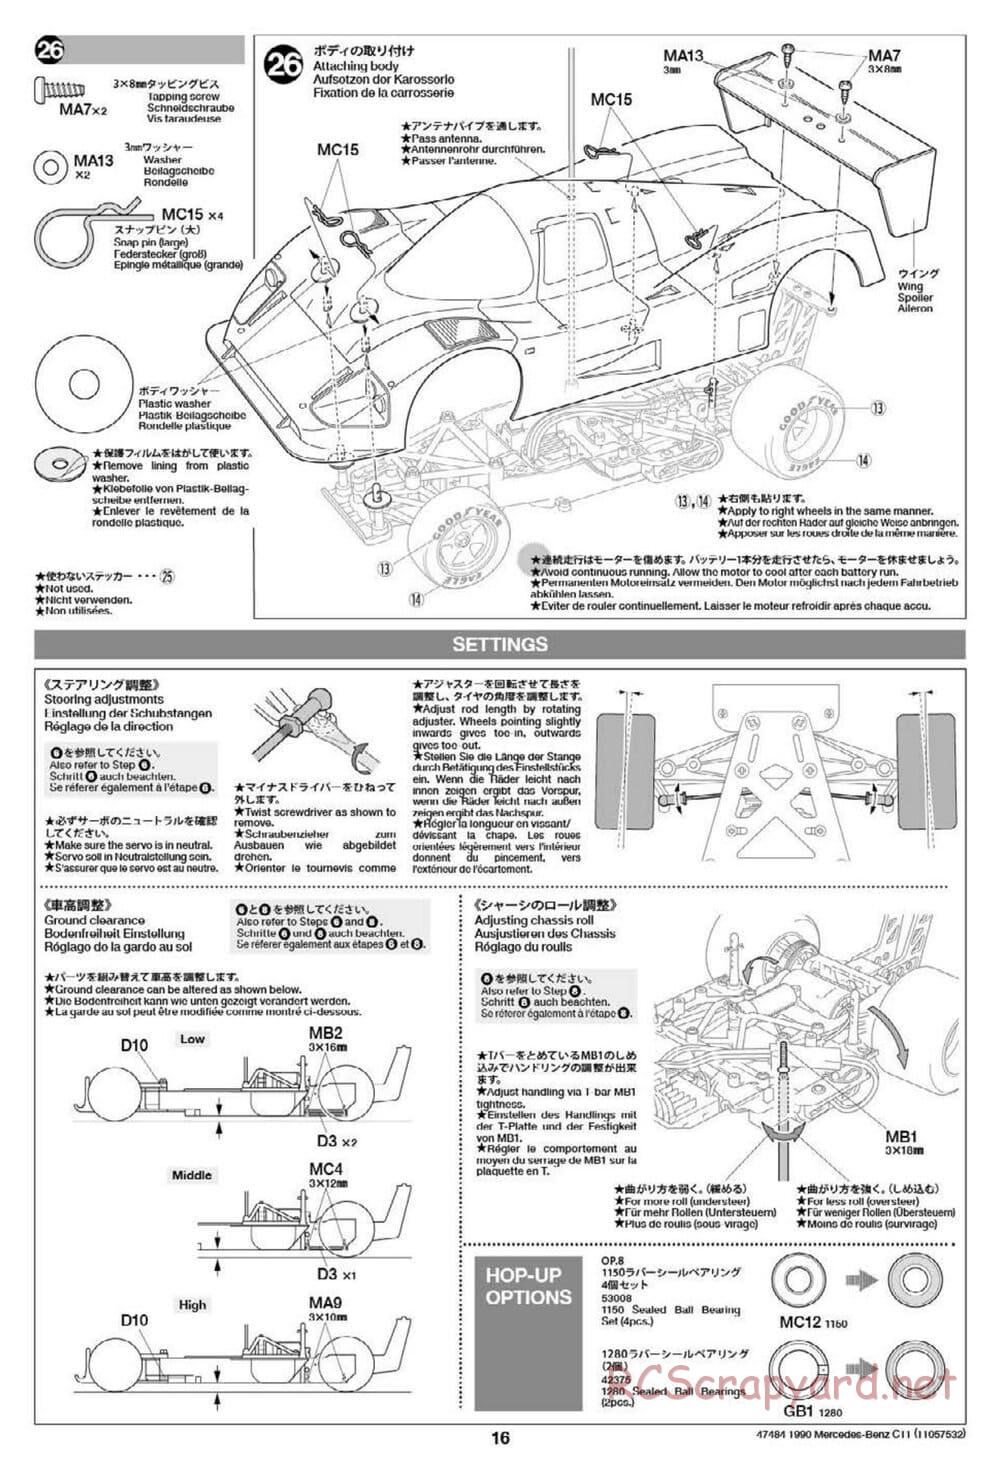 Tamiya - 1990 Mercedes-Benz C11 - Group-C Chassis - Manual - Page 16